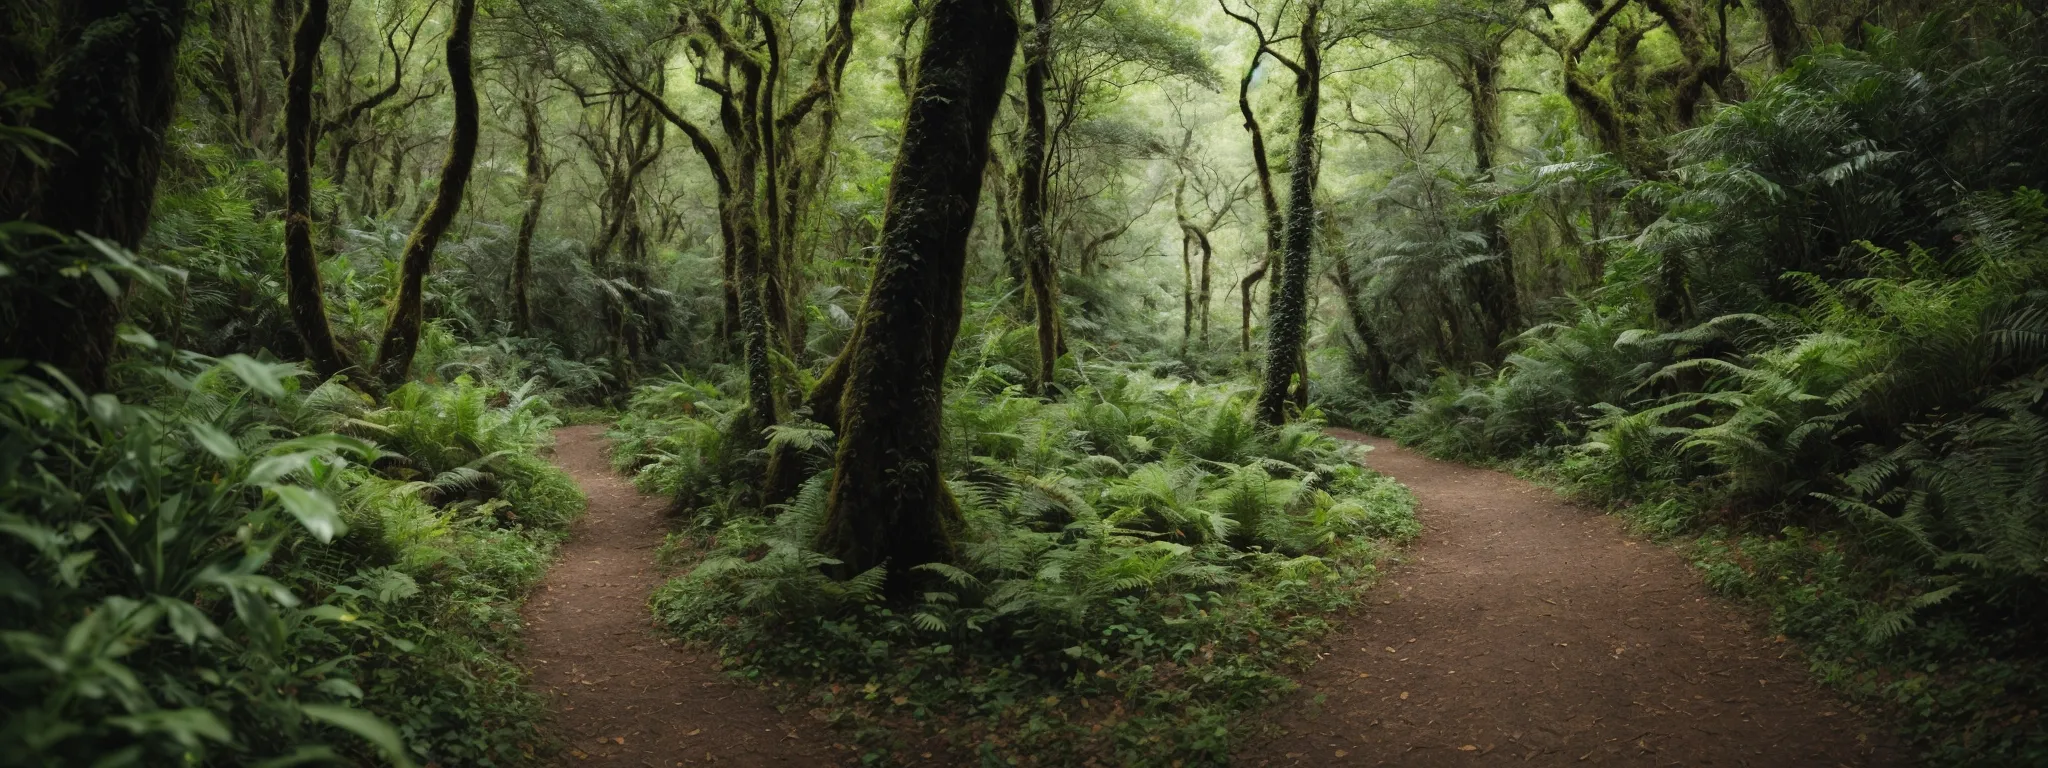 a path winding through a lush forest representing the journey of optimizing technical seo in wordpress.